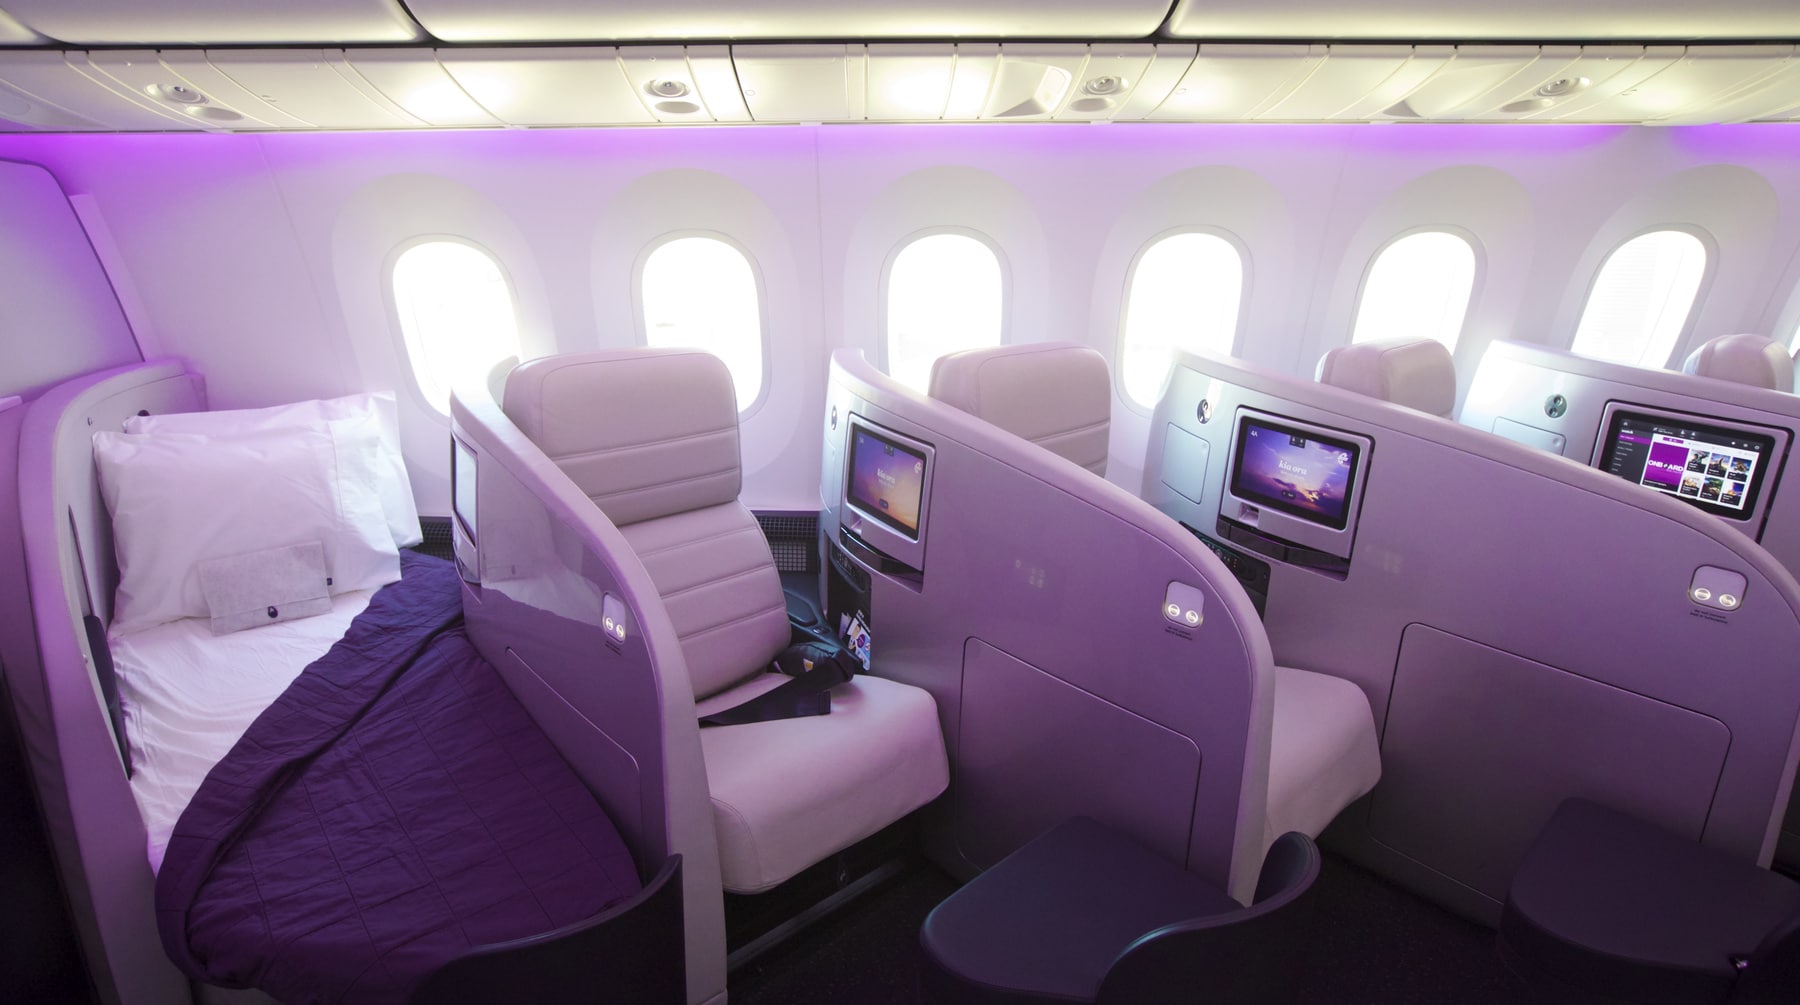 2. Overall Comfort of the Business Class Experience